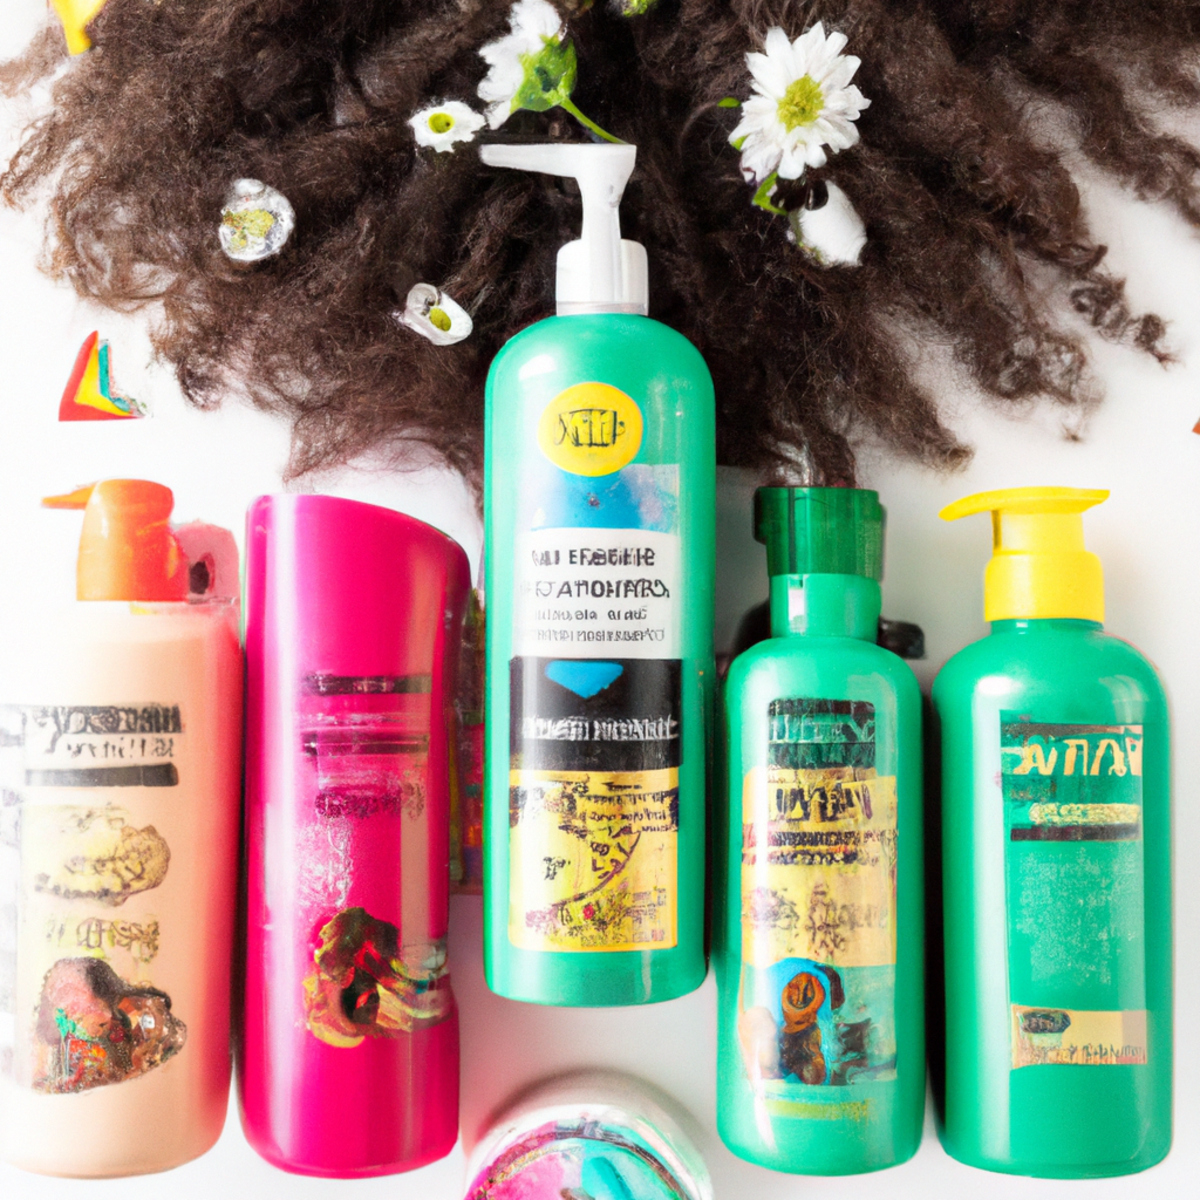 Collection of curly hair care products, including sulfate-free shampoo, conditioner, curl cream, gel, and leave-in conditioner.